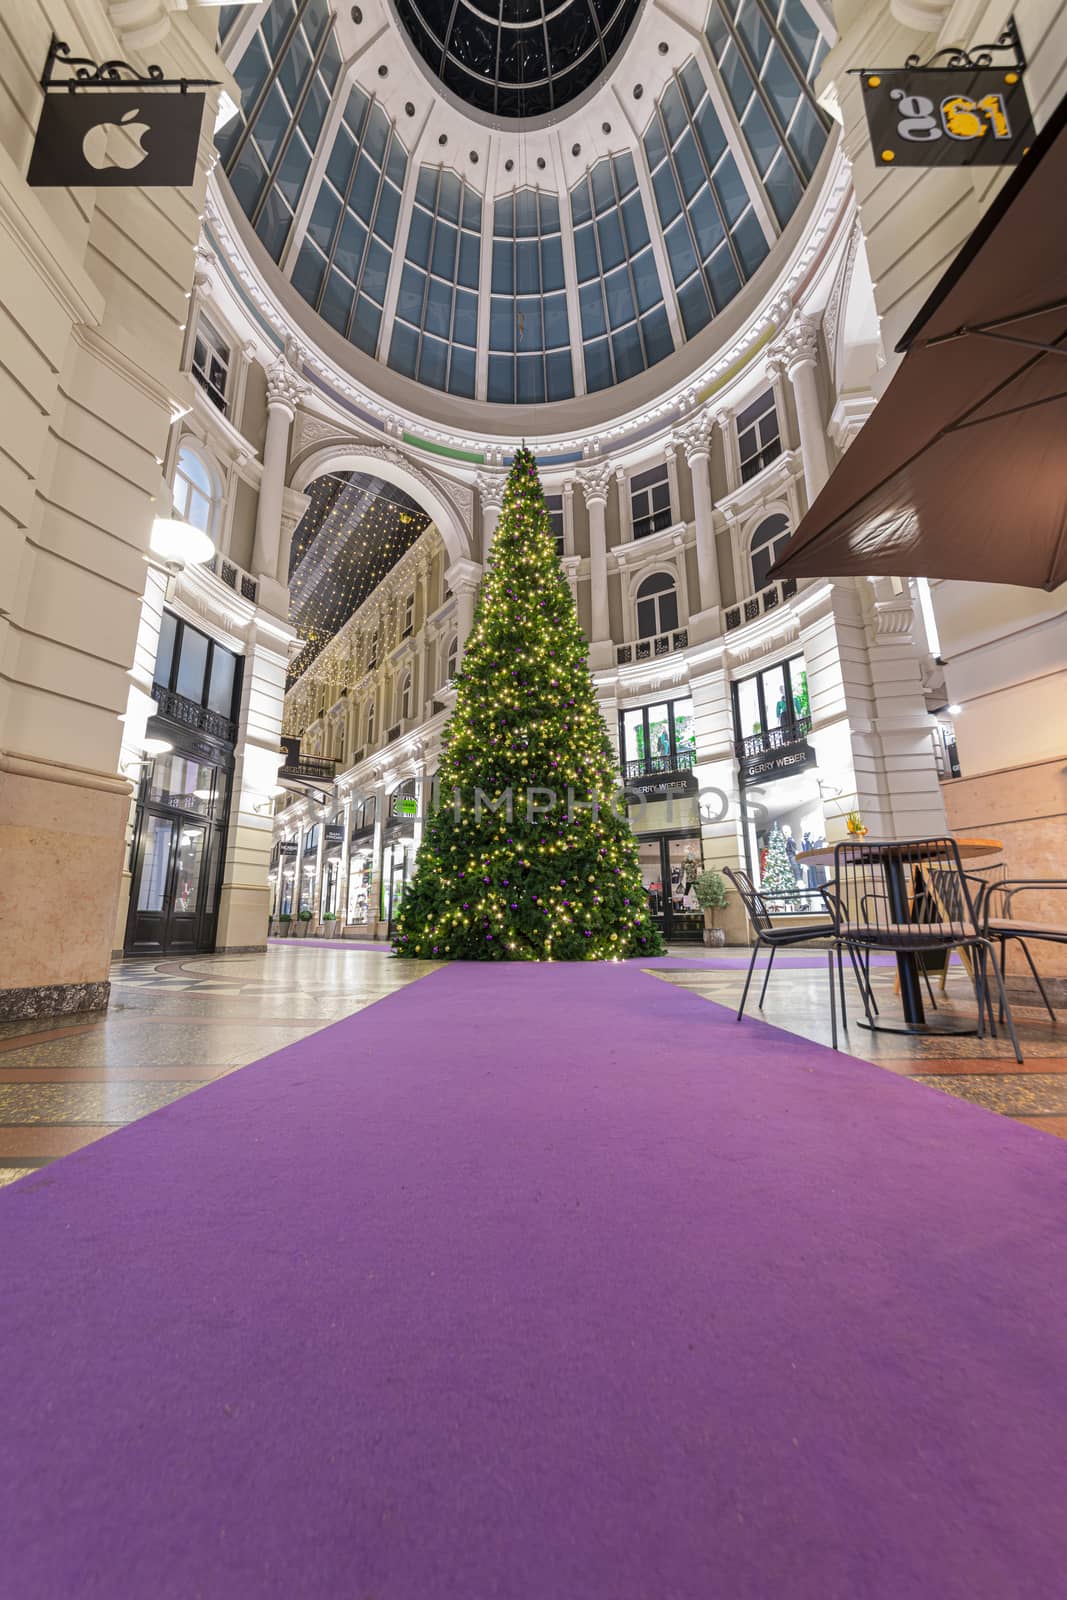 THE HAGUE, 30 December 2019 - Christmas tree in De Passage shopping mall at night after a crowded and busy shopping time, Netherlands
 by ankorlight